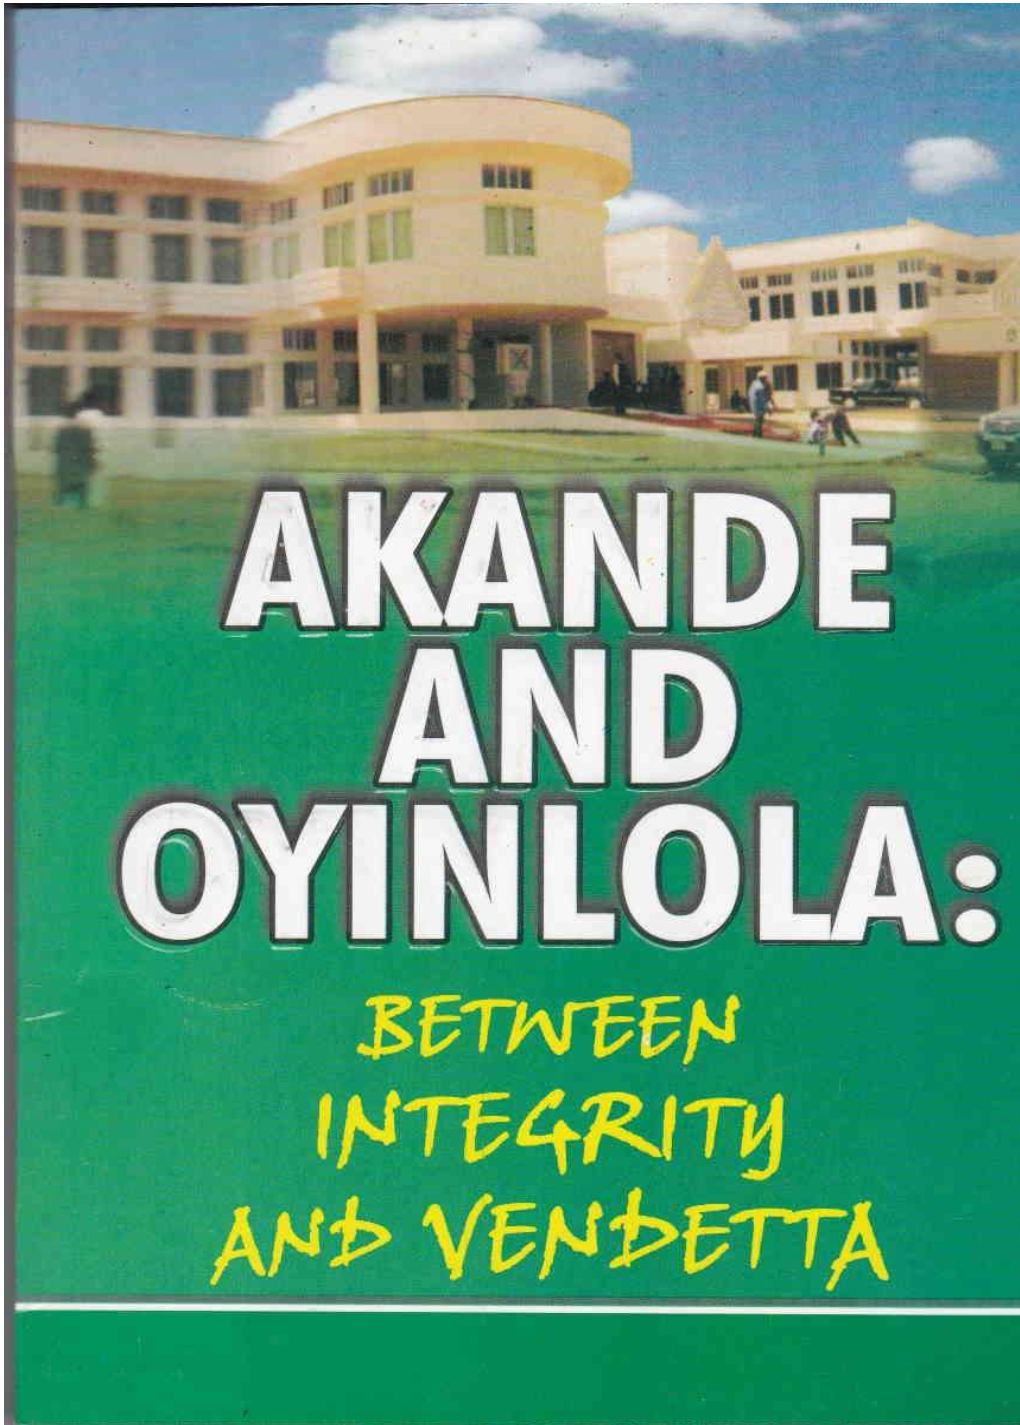 Akande to Oyinlola: You're Behind the Orchestrated Attempt to Tarnish My Reputation